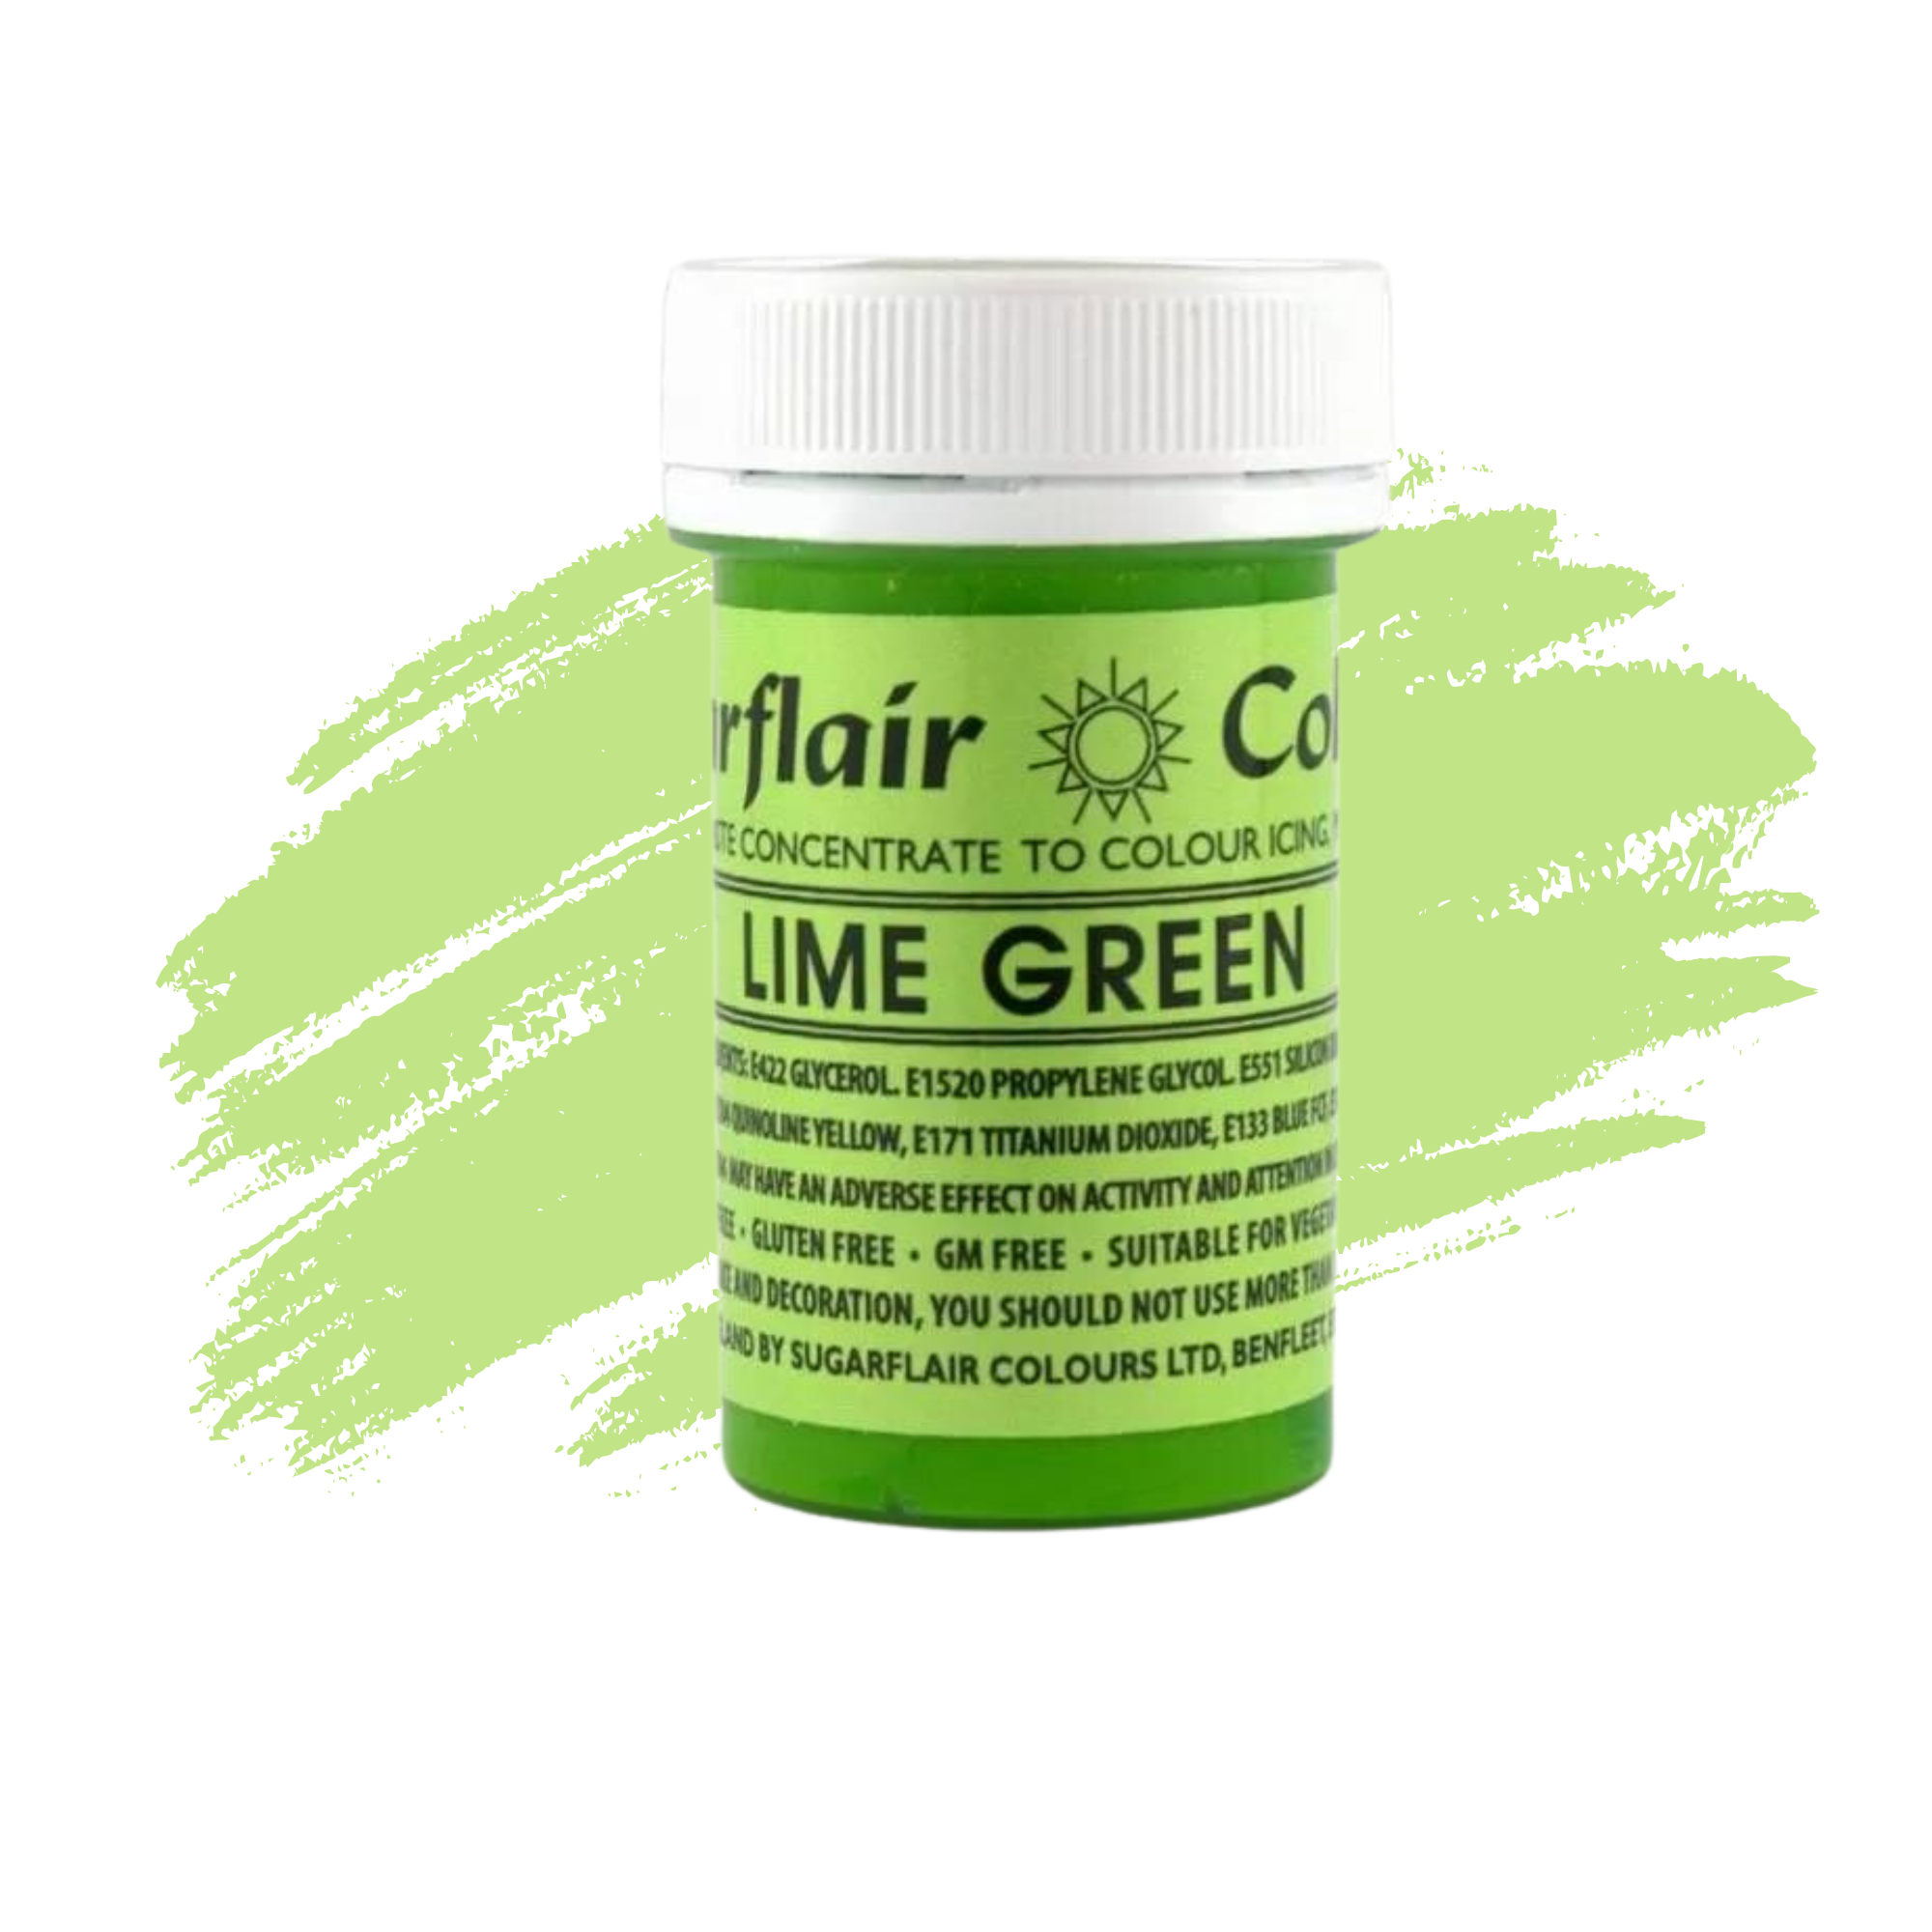 Sugarflair Paste Colours Concentrated Food Colouring - Spectral Lime Green - 25g